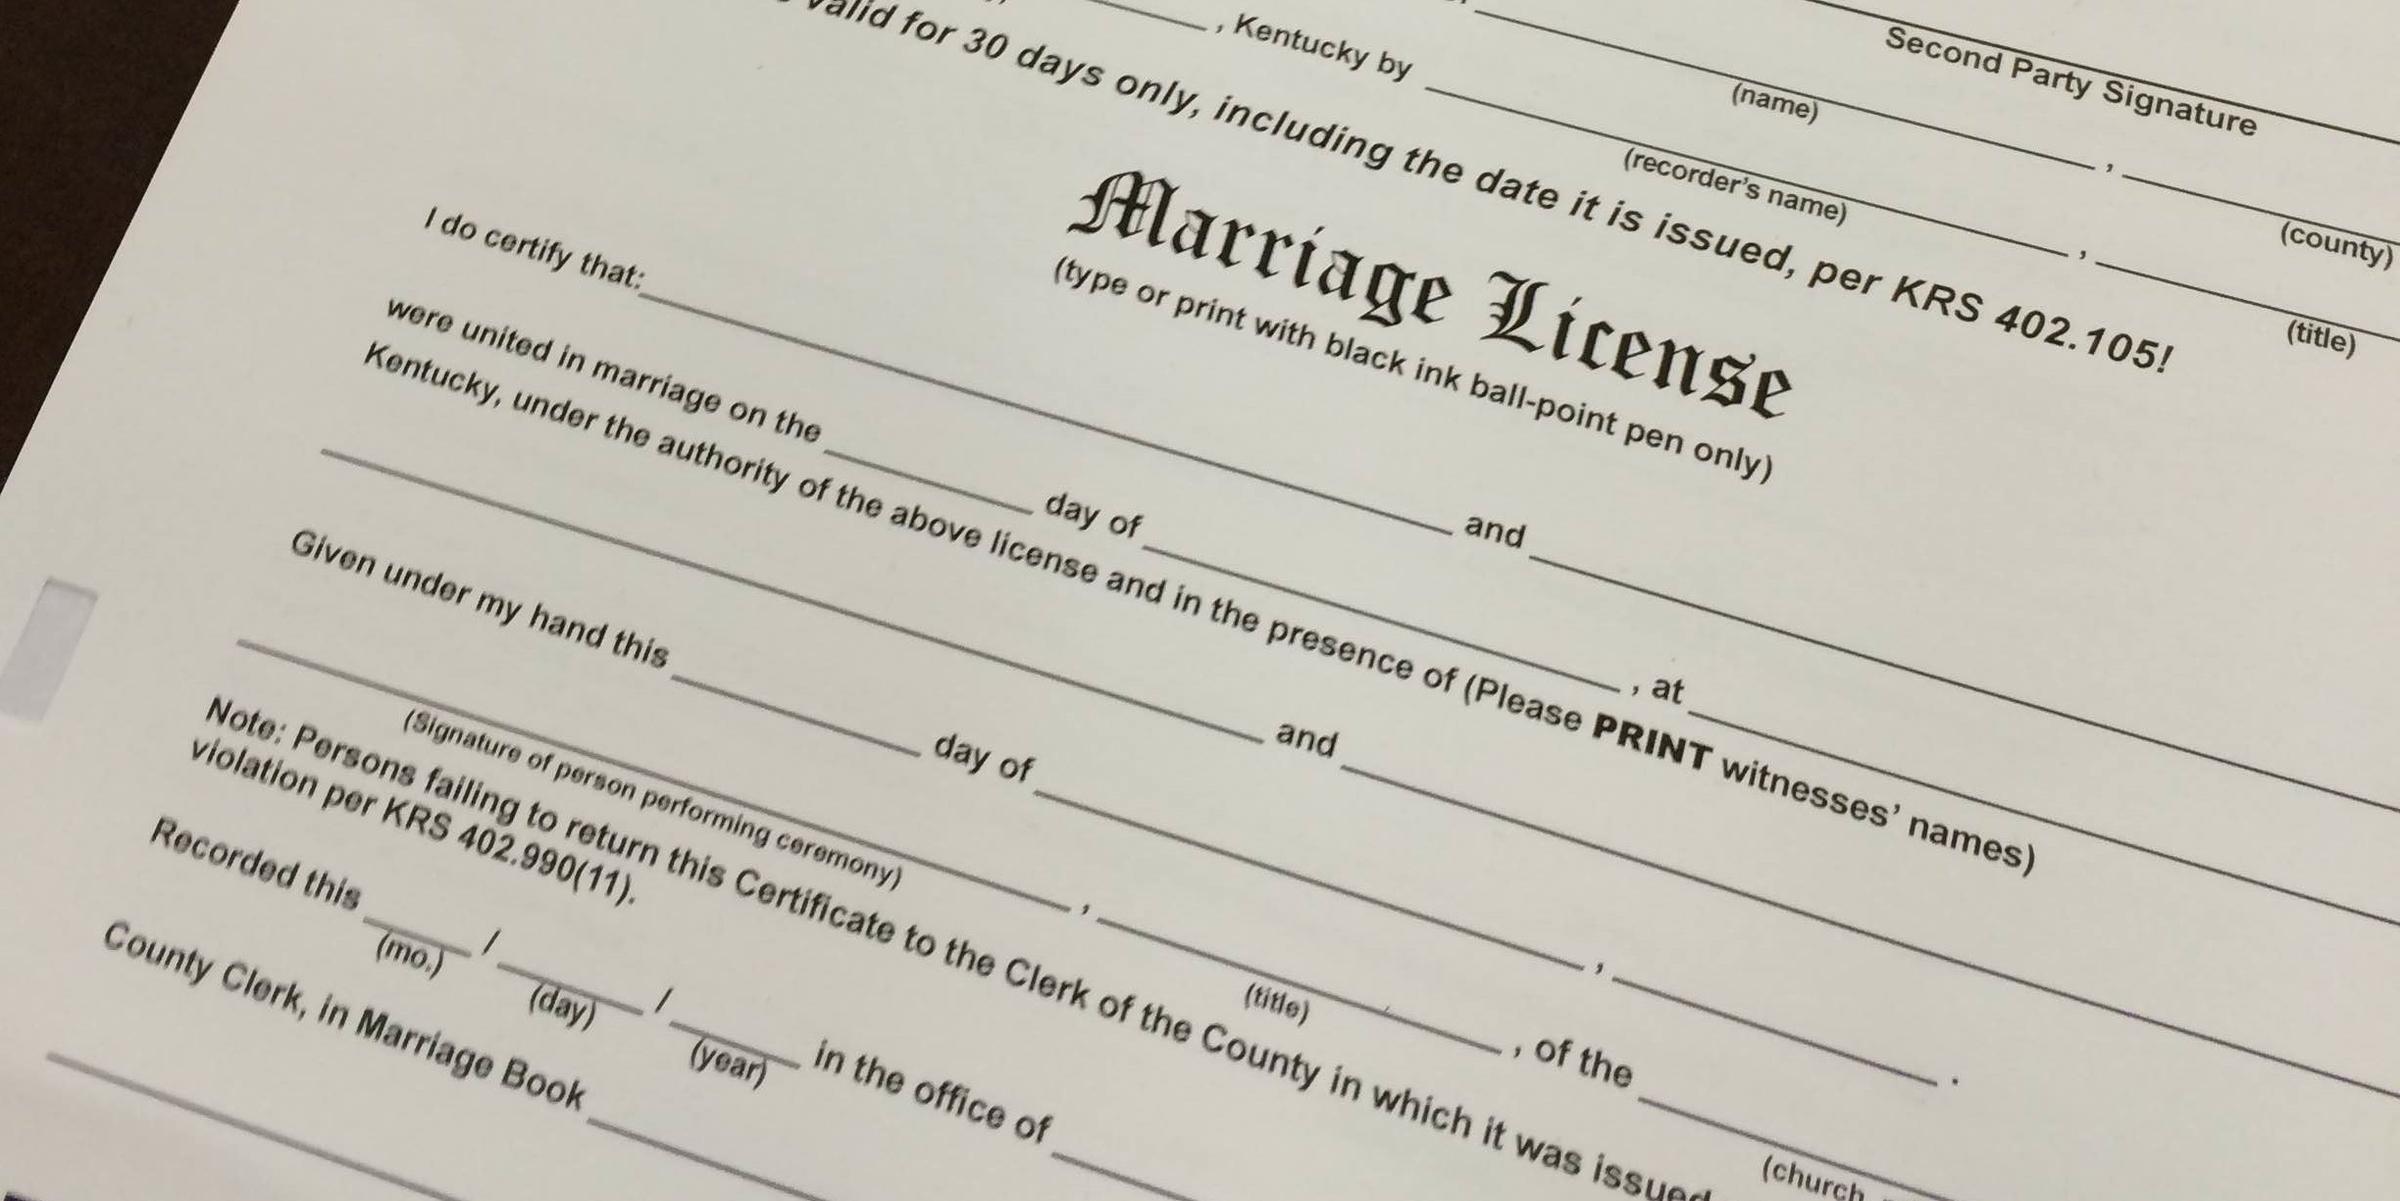 couples-seek-legal-costs-in-kentucky-marriage-license-case-wkms